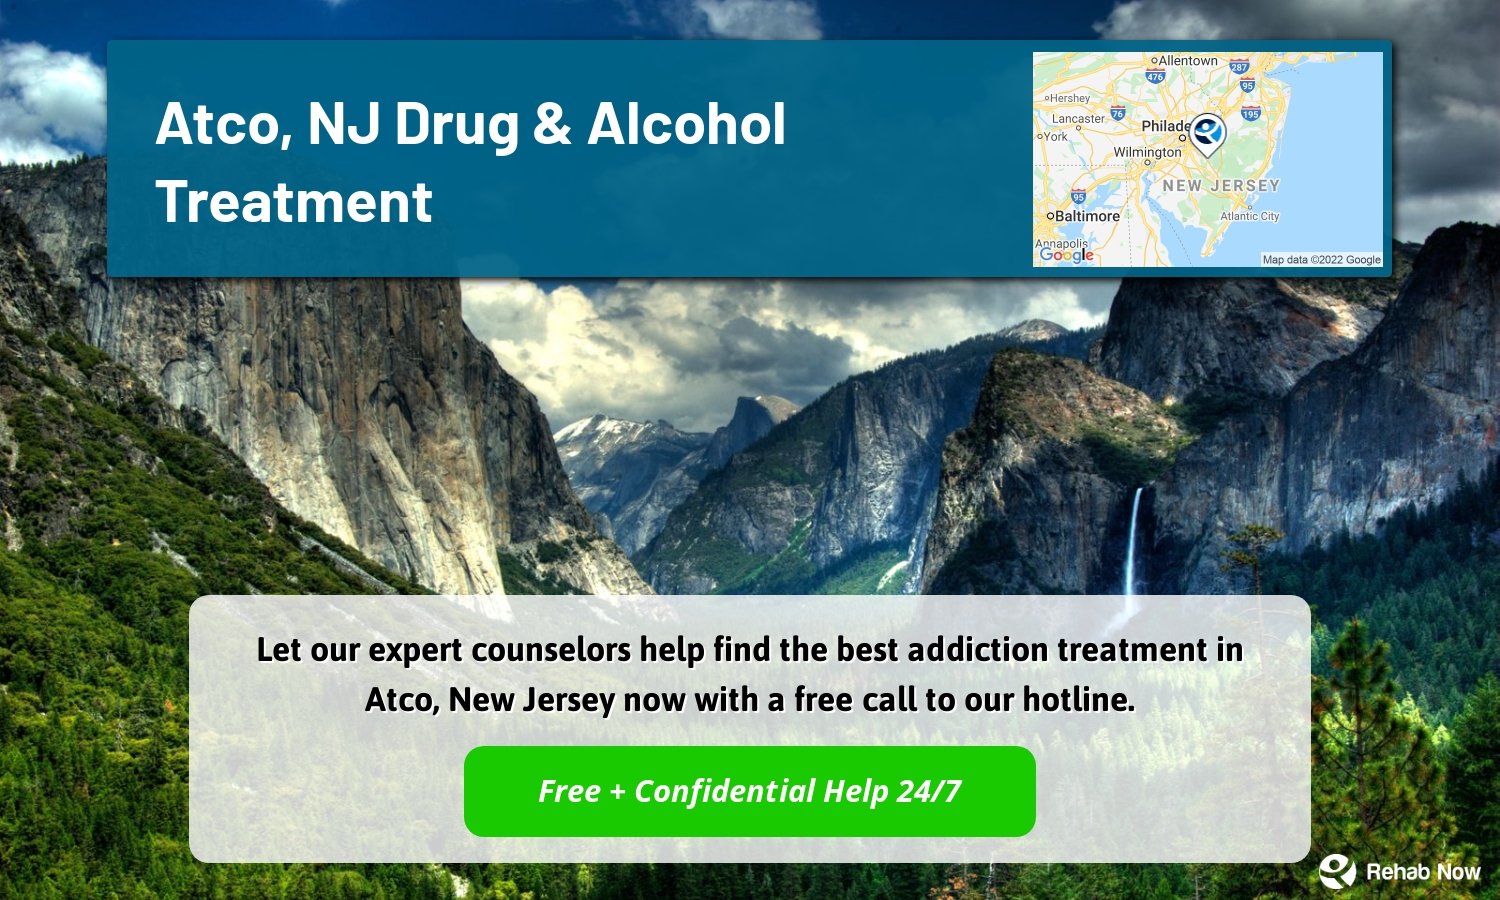 Let our expert counselors help find the best addiction treatment in Atco, New Jersey now with a free call to our hotline.